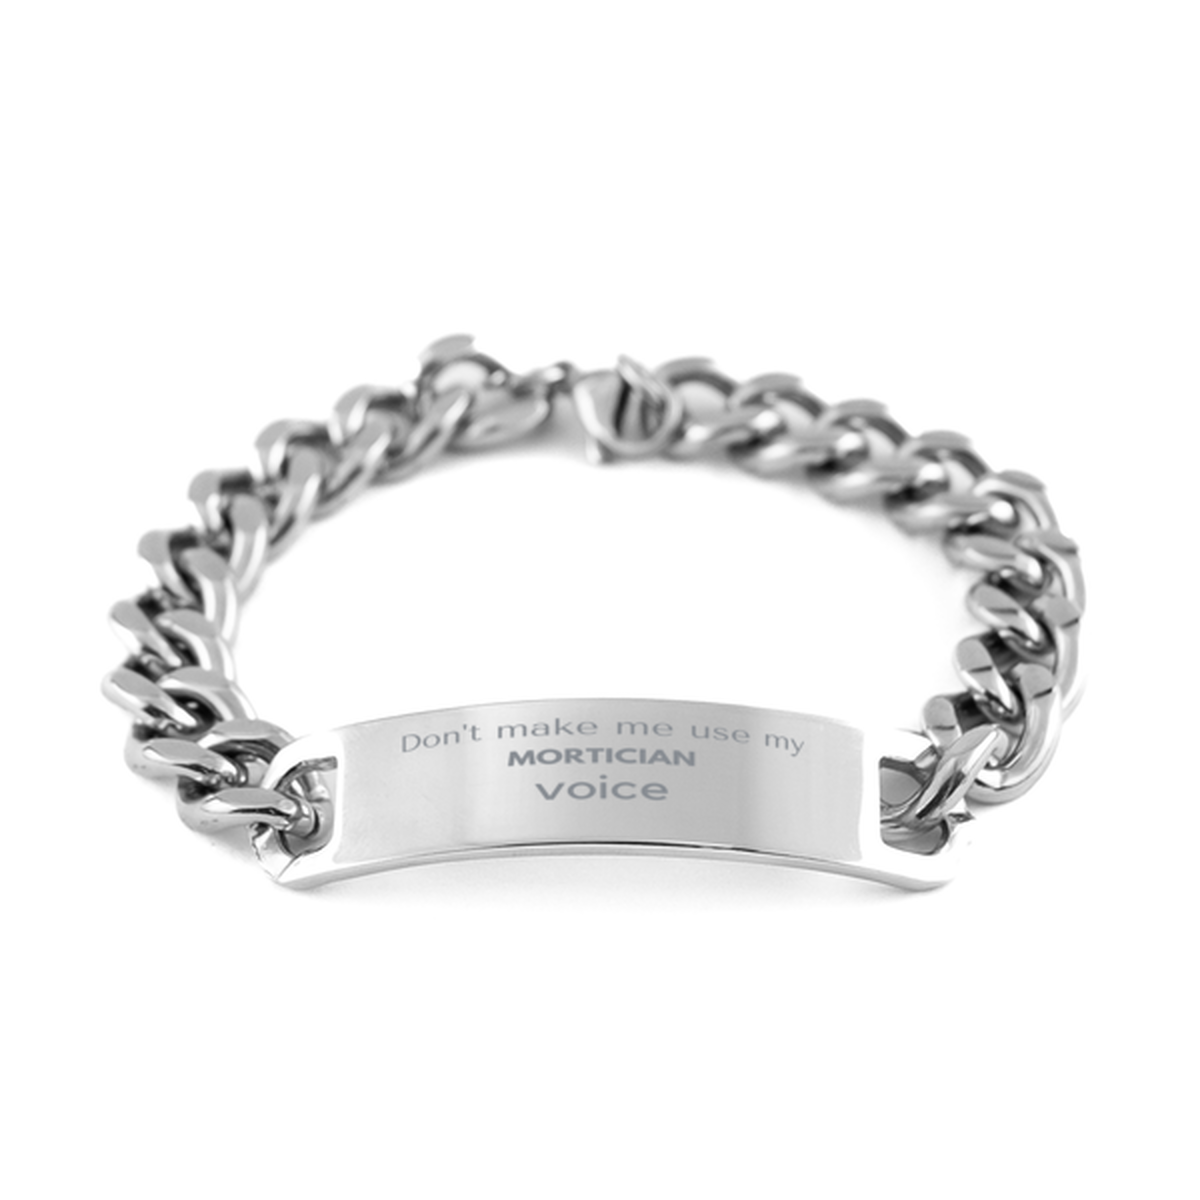 Don't make me use my Mortician voice, Sarcasm Mortician Gifts, Christmas Mortician Cuban Chain Stainless Steel Bracelet Birthday Unique Gifts For Mortician Coworkers, Men, Women, Colleague, Friends